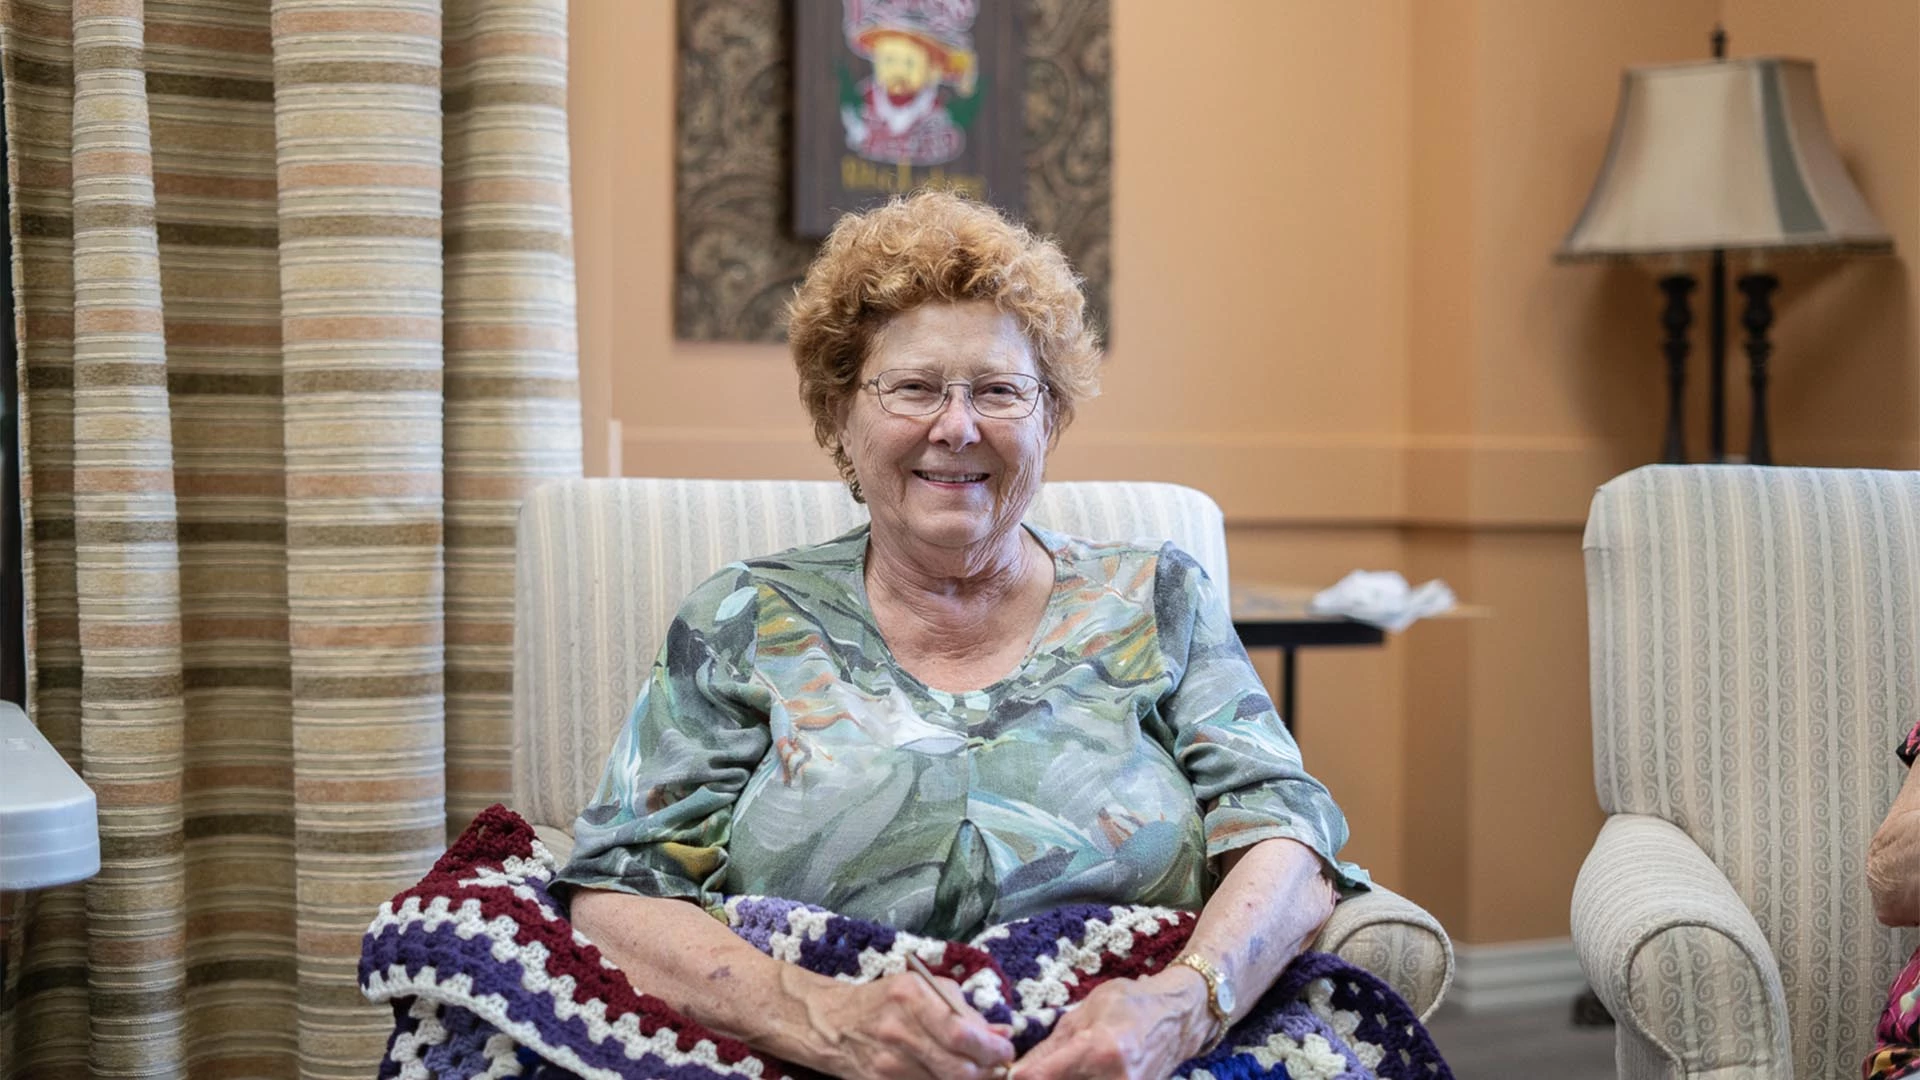 A senior woman smiling and holding a blanket